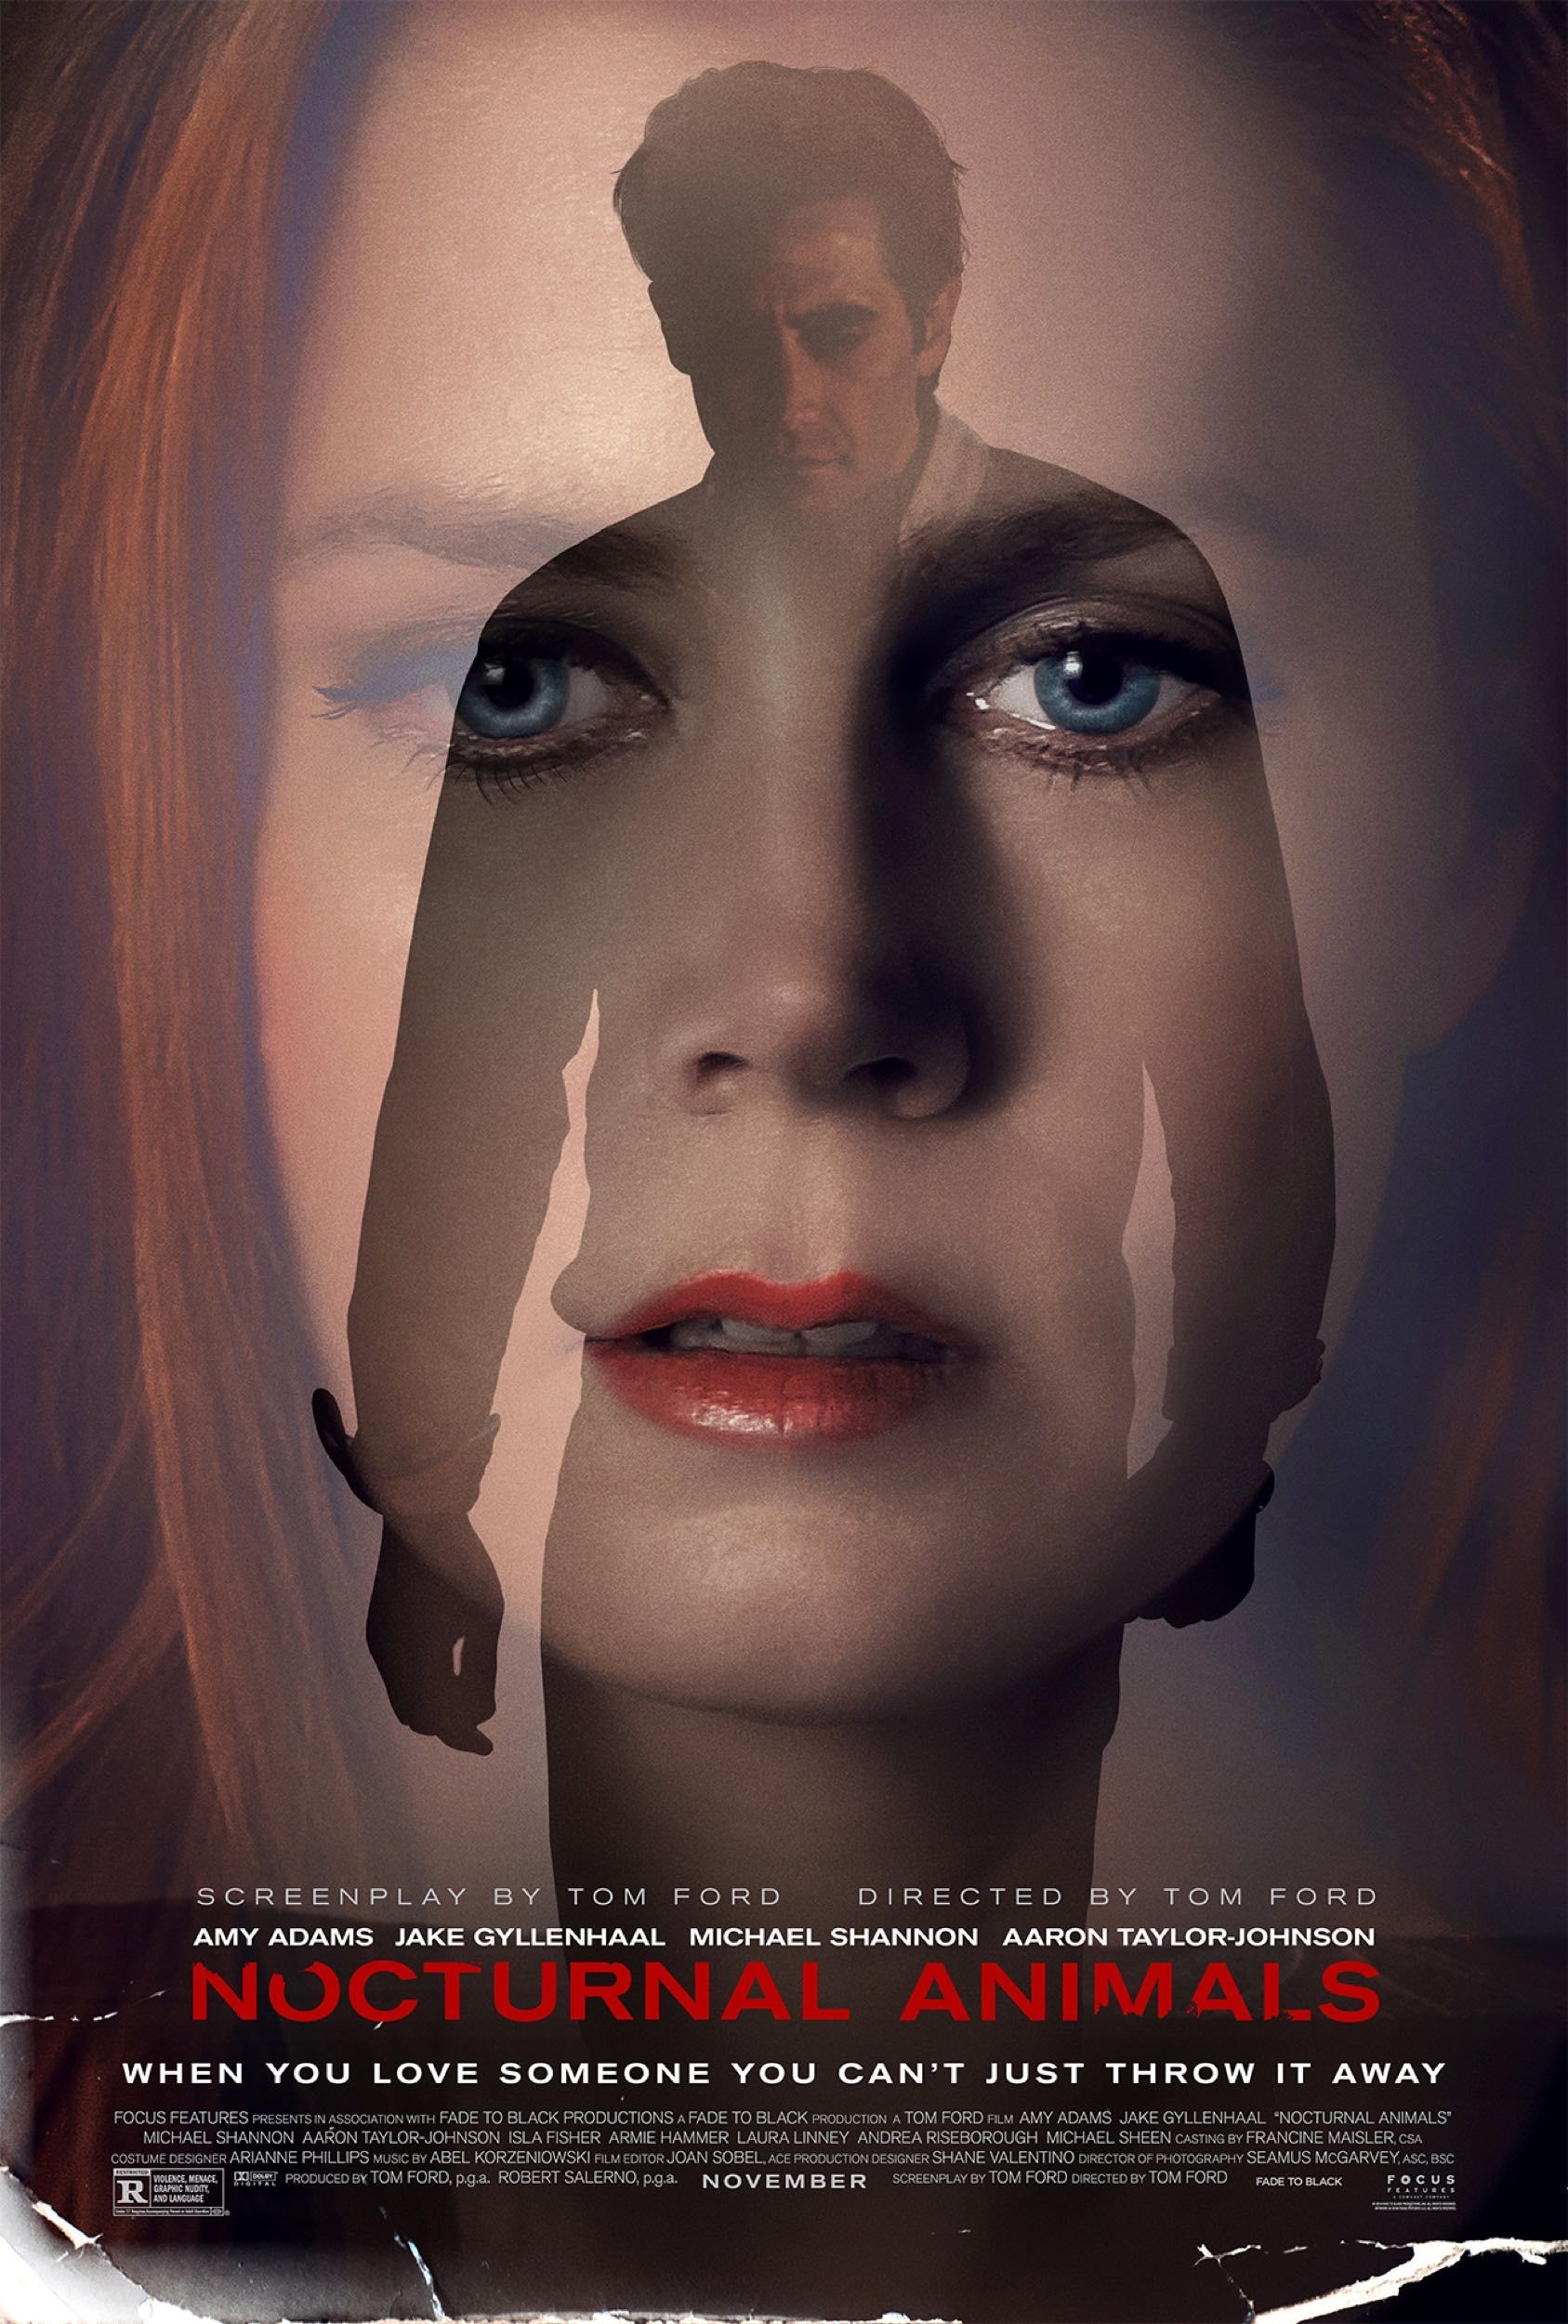 New Nocturnal Animals Poster